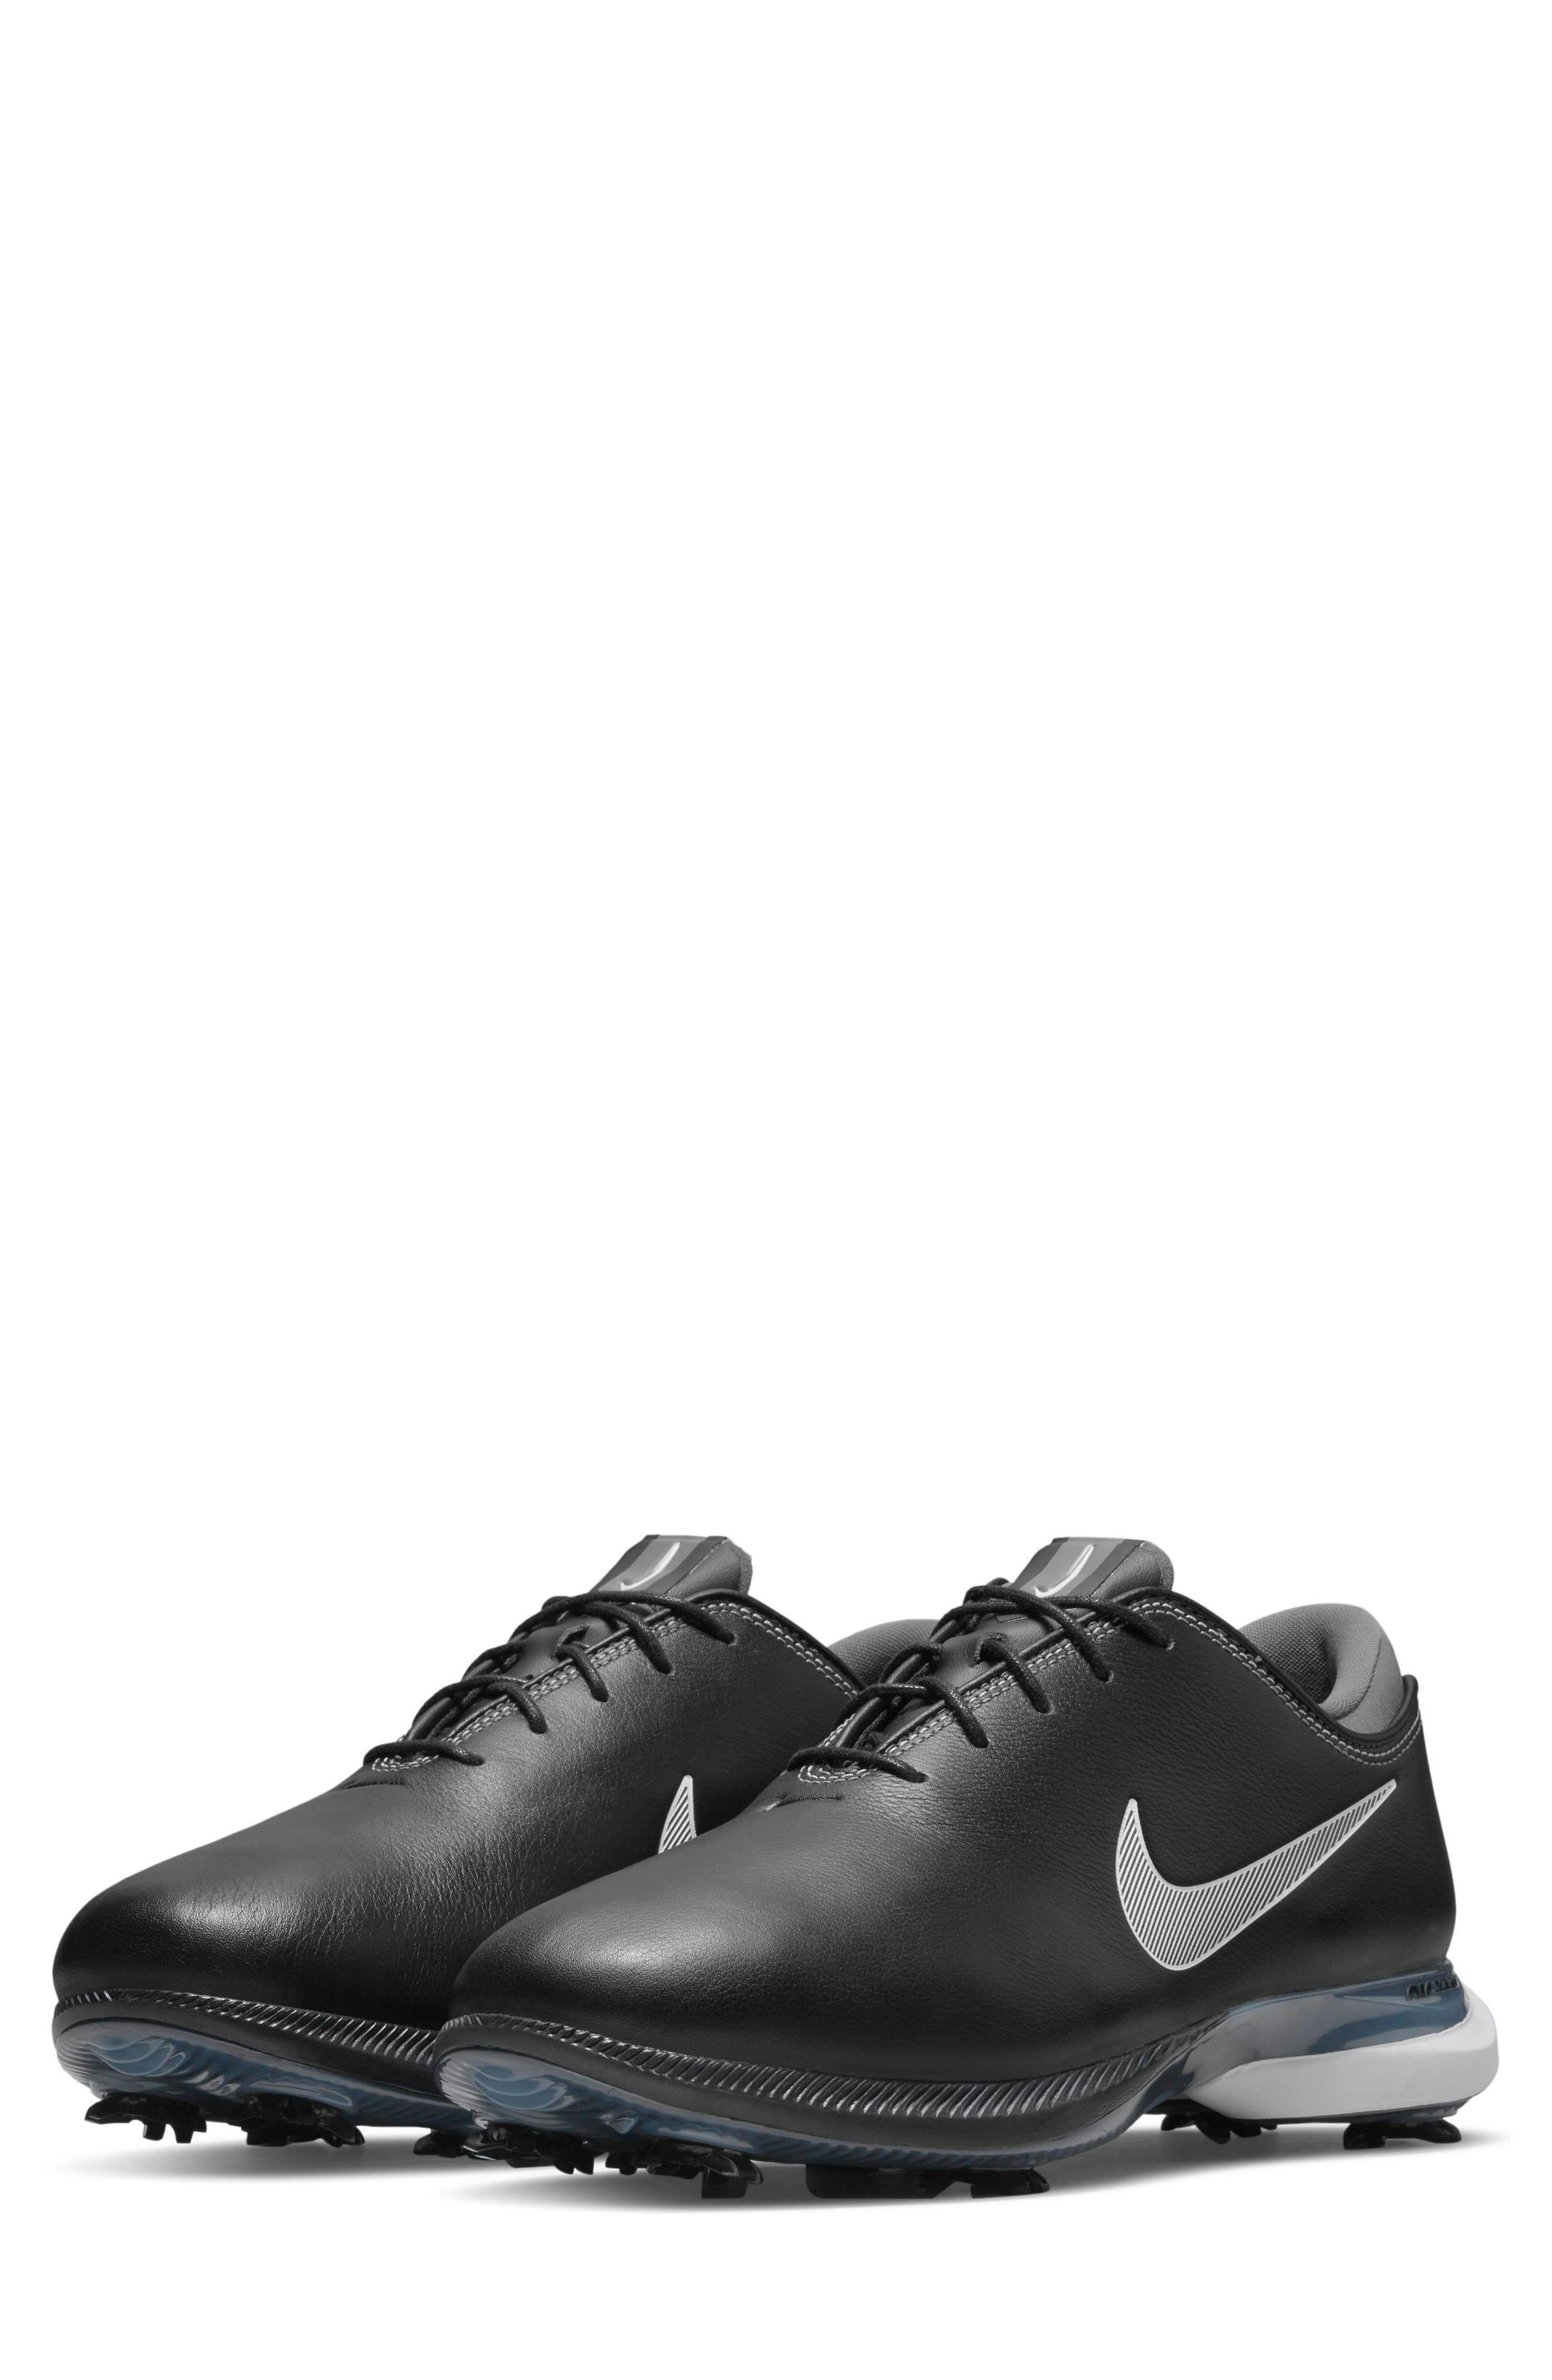 discount nike shoes mens